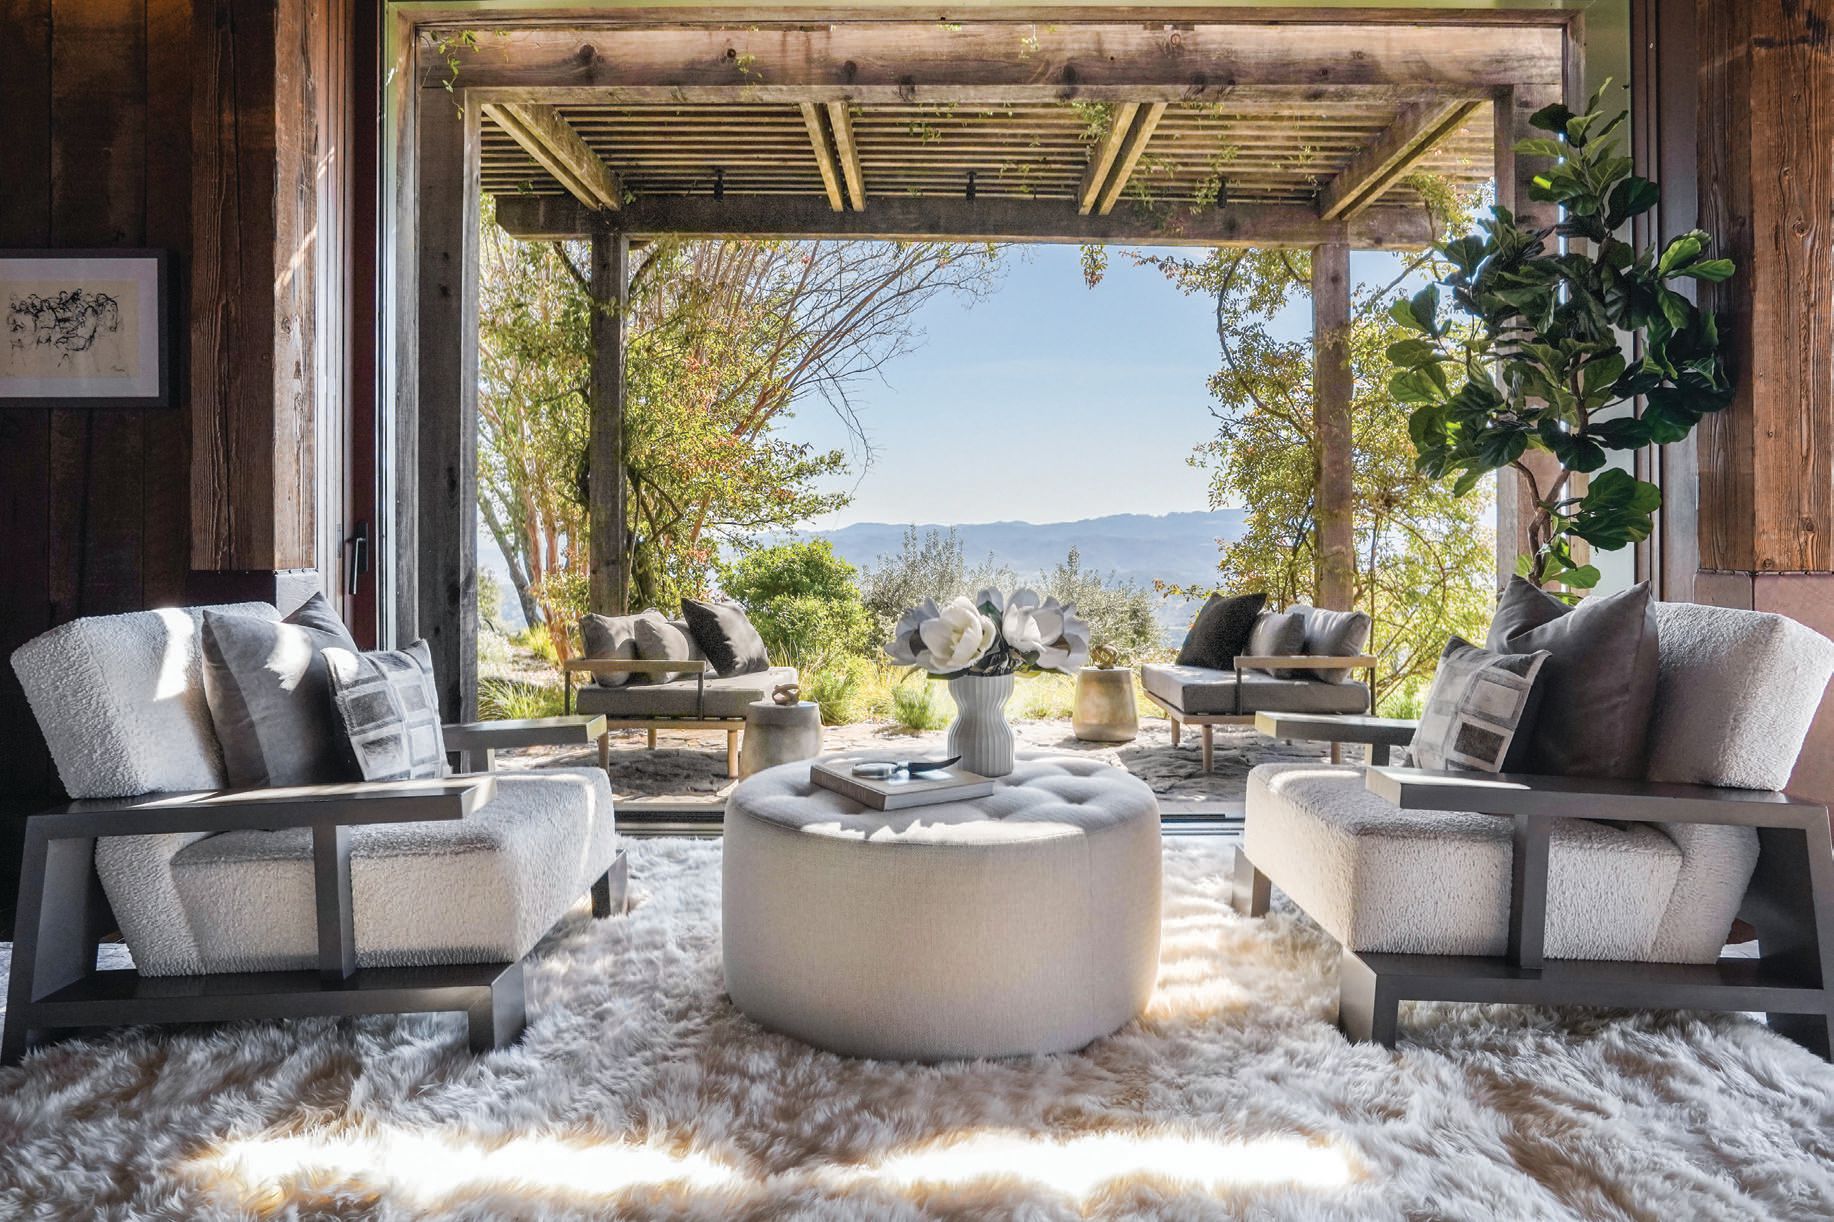 Plush carpeting, cozy environs and jaw-dropping views complete this indoor-outdoor lounge space. PHOTO BY CAROLINE PEEL AND AERIAL CANVAS